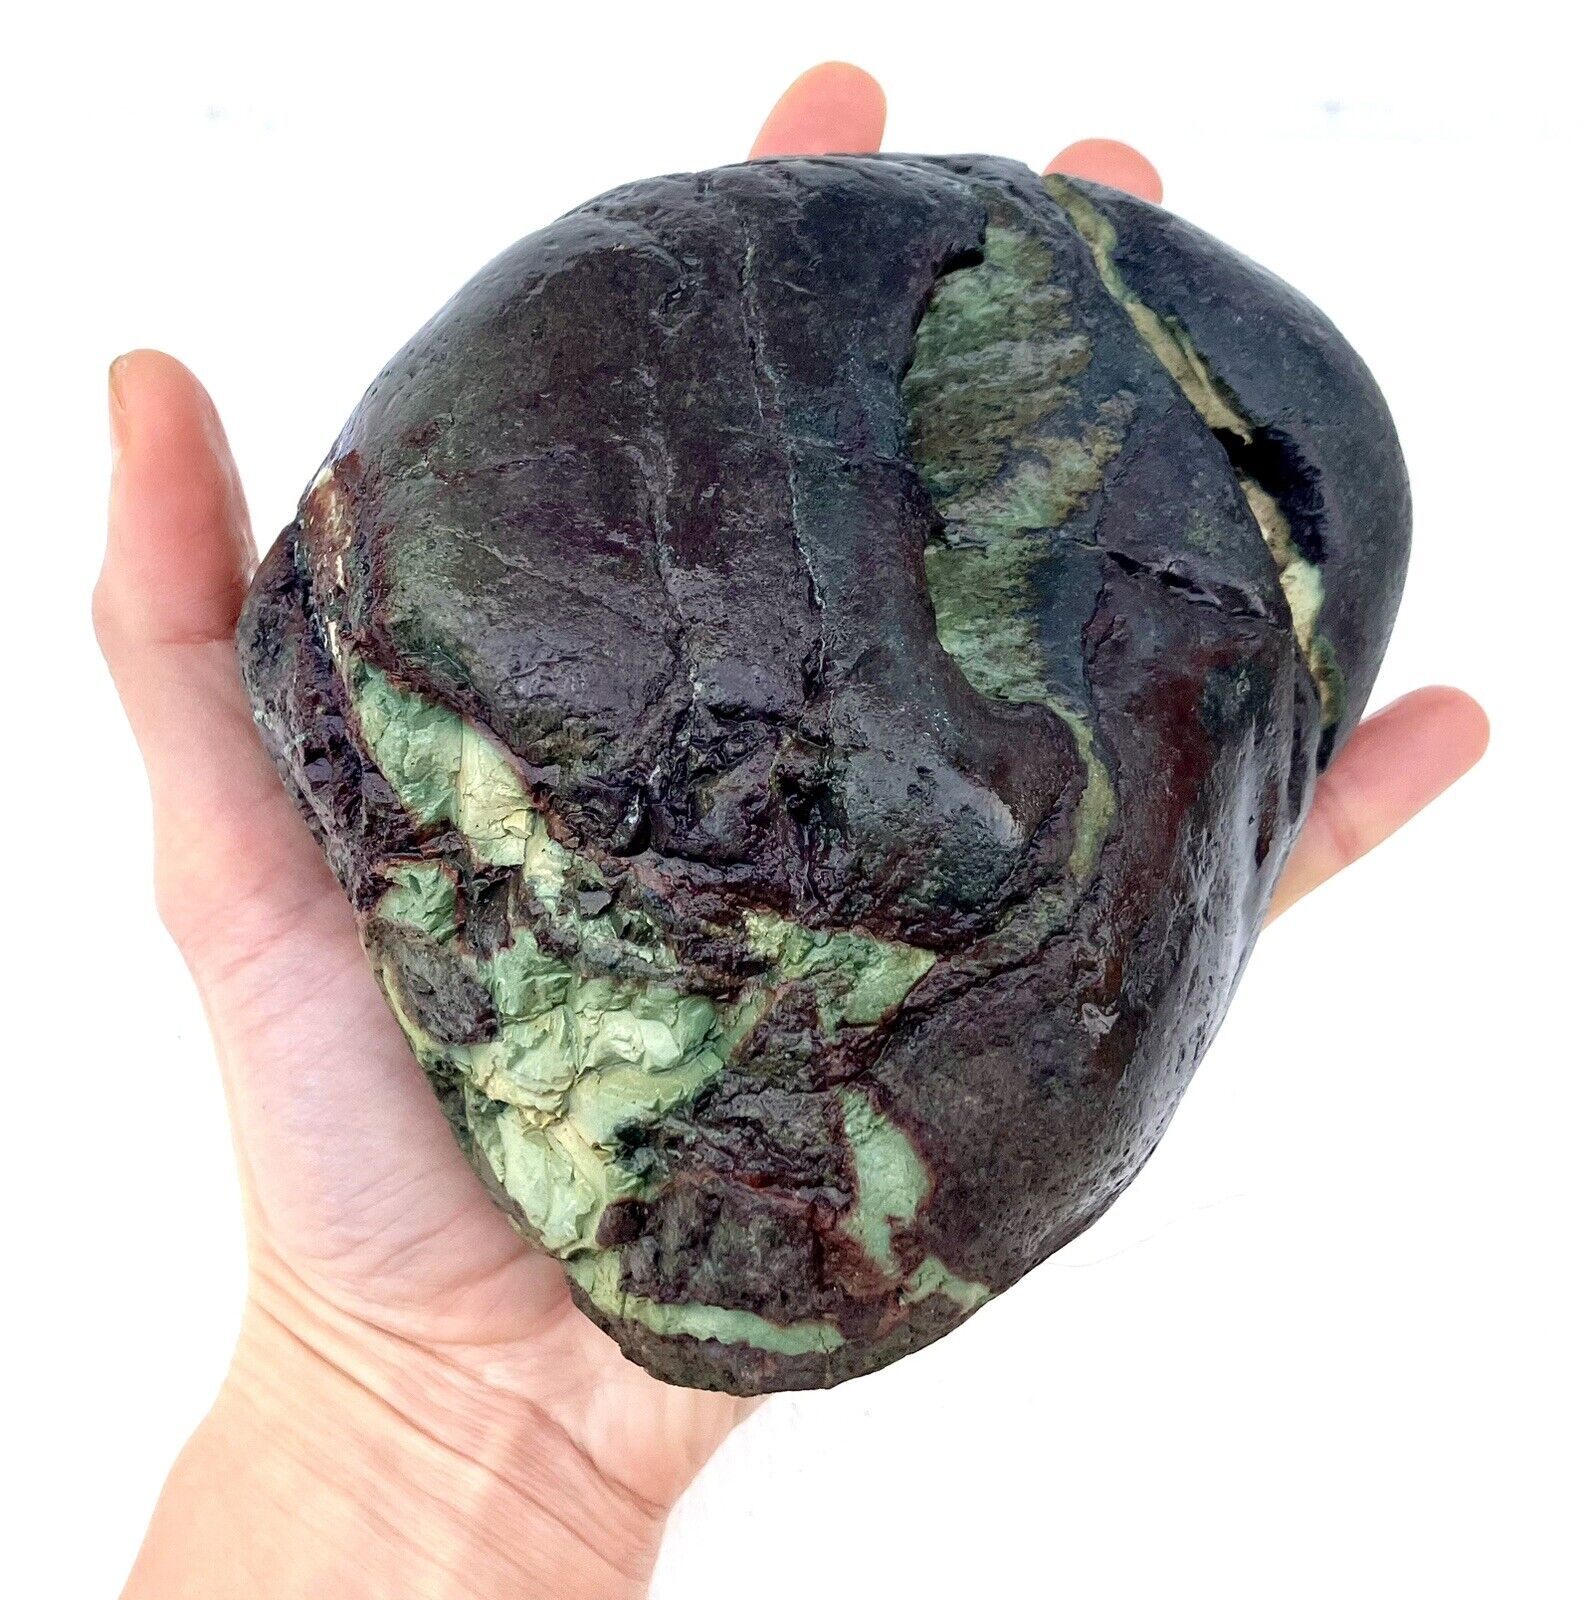 4 lb Unique Colorful Natural Rock from Pacific Northwest, Blue Purple Green